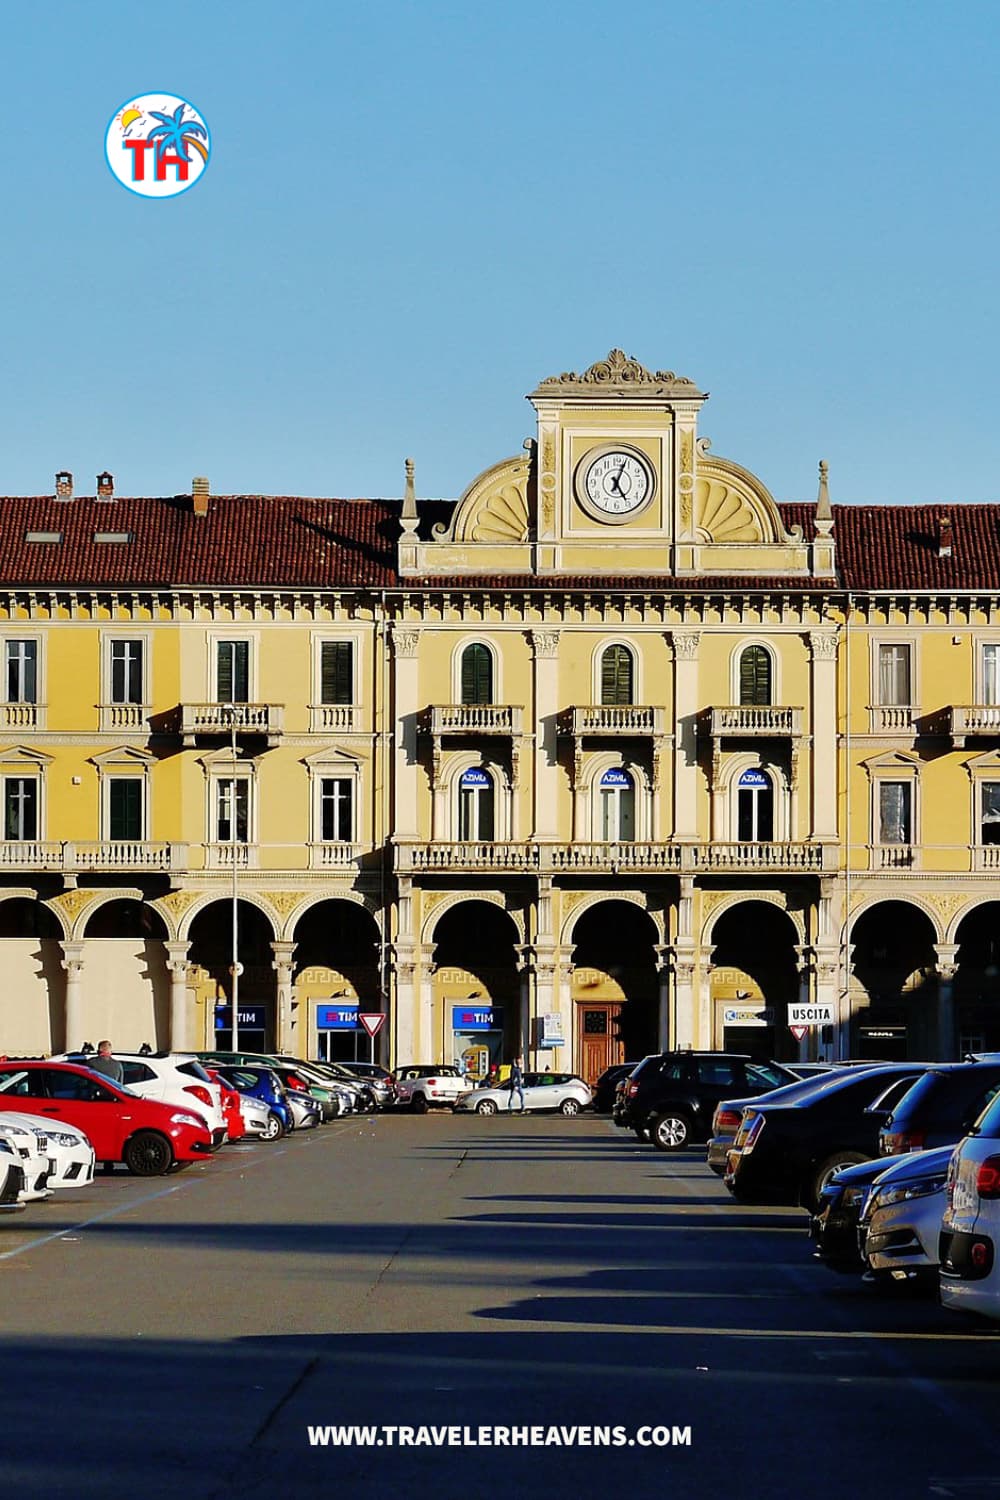 Beautiful Destinations, Best Places to Visit in Alessandria, Italy, Italy Travel Guide, Travel to Alessandria, Visit Alessandria